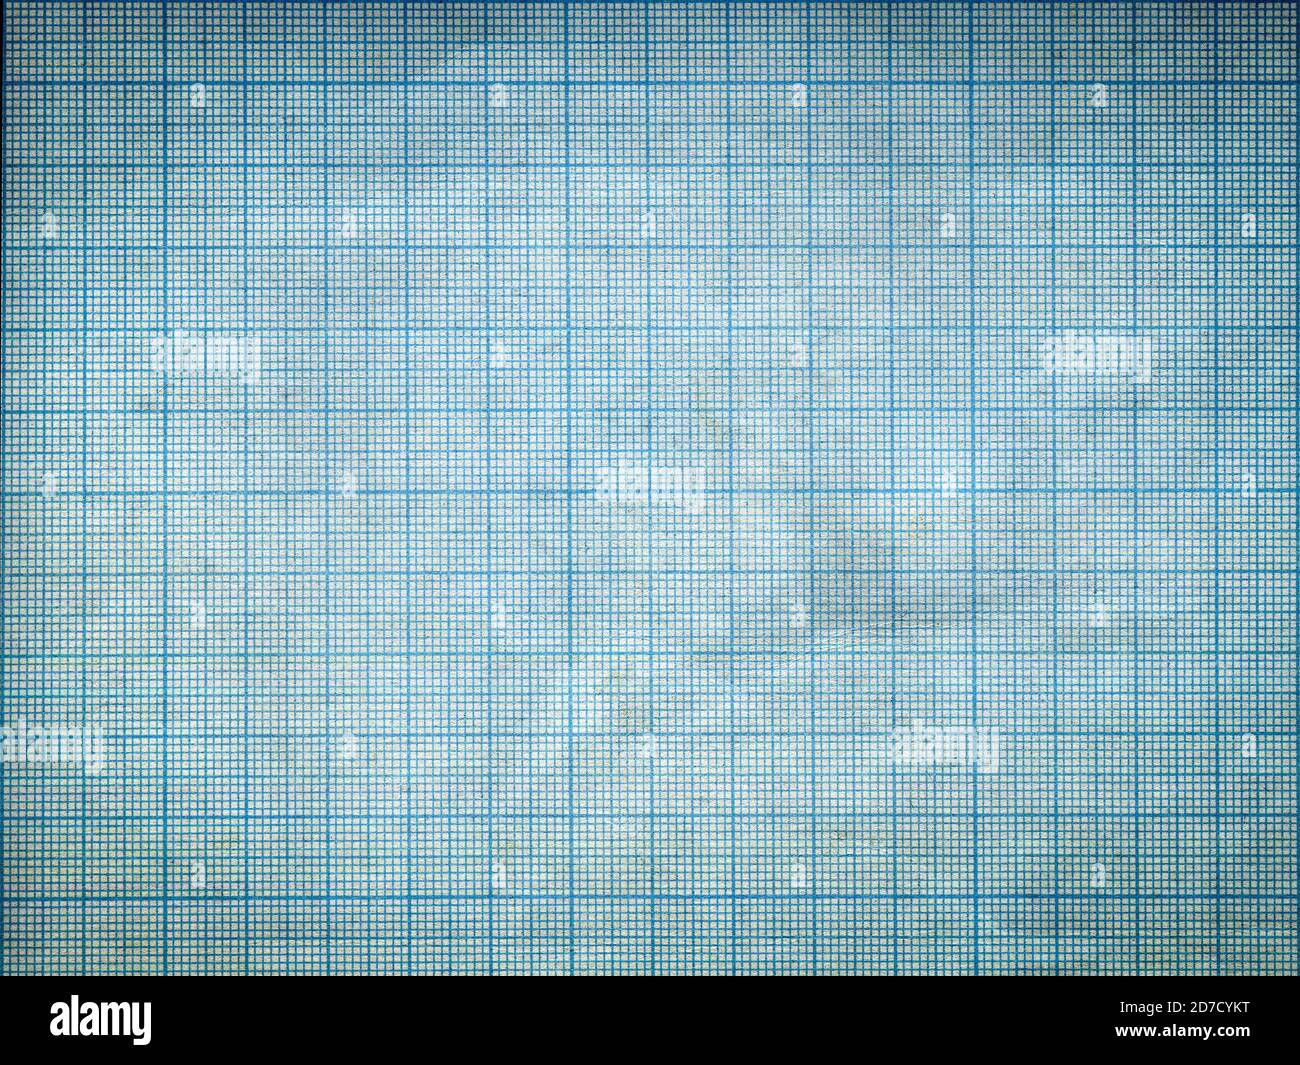 Old wrinkled grid scale paper sheet background Stock Photo